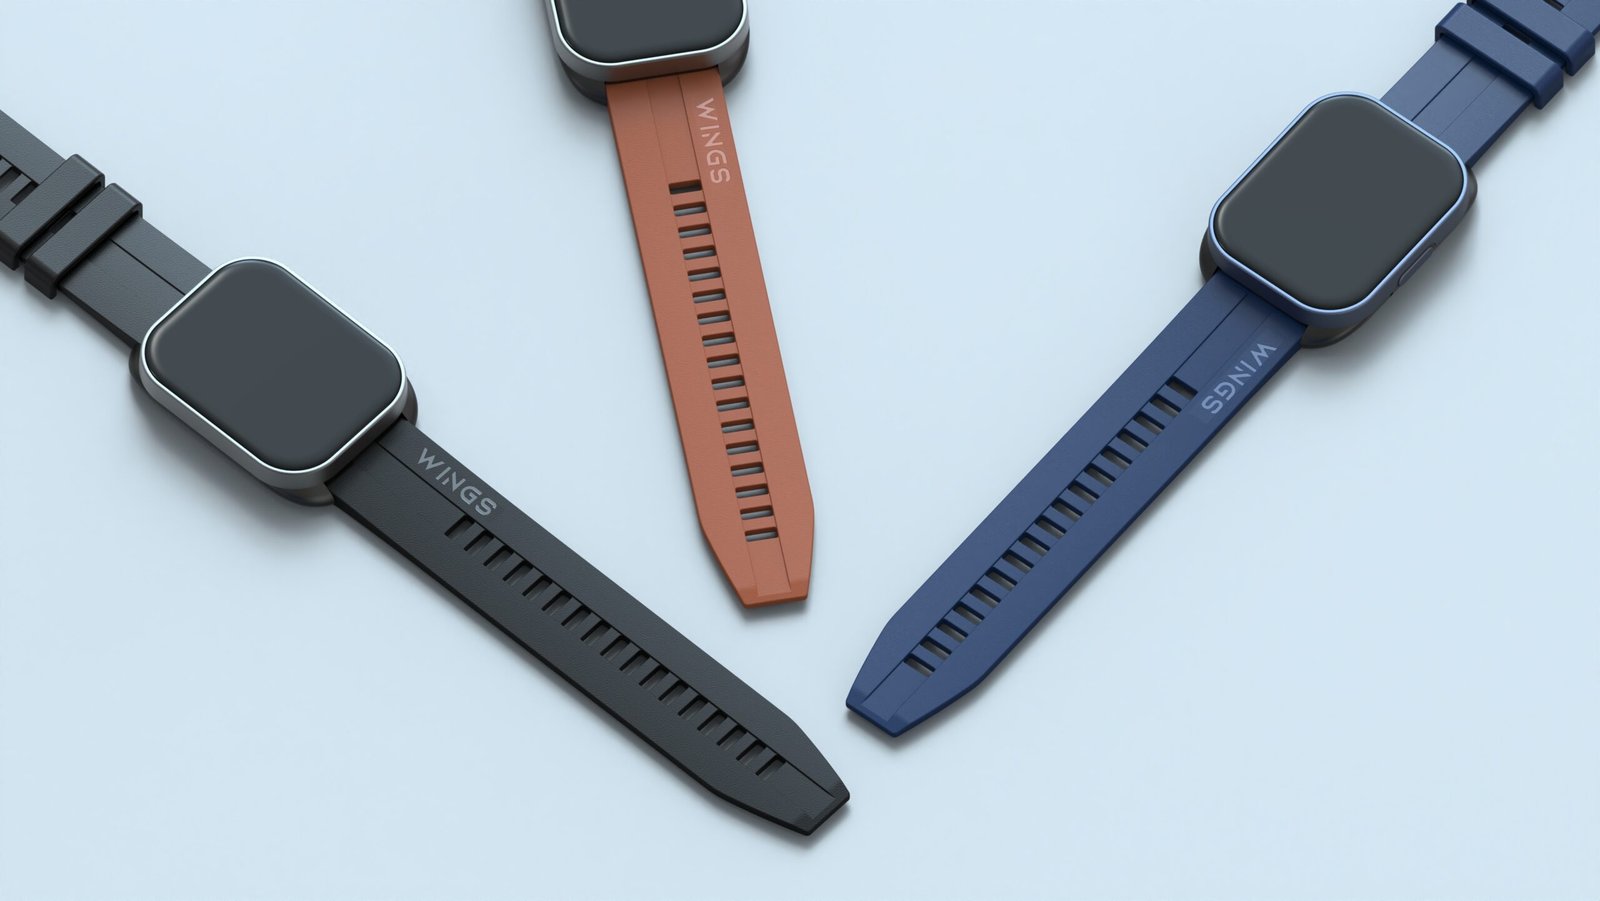 Wings Introduces the Urbana Smartwatch: A New Era of Tech Elegance